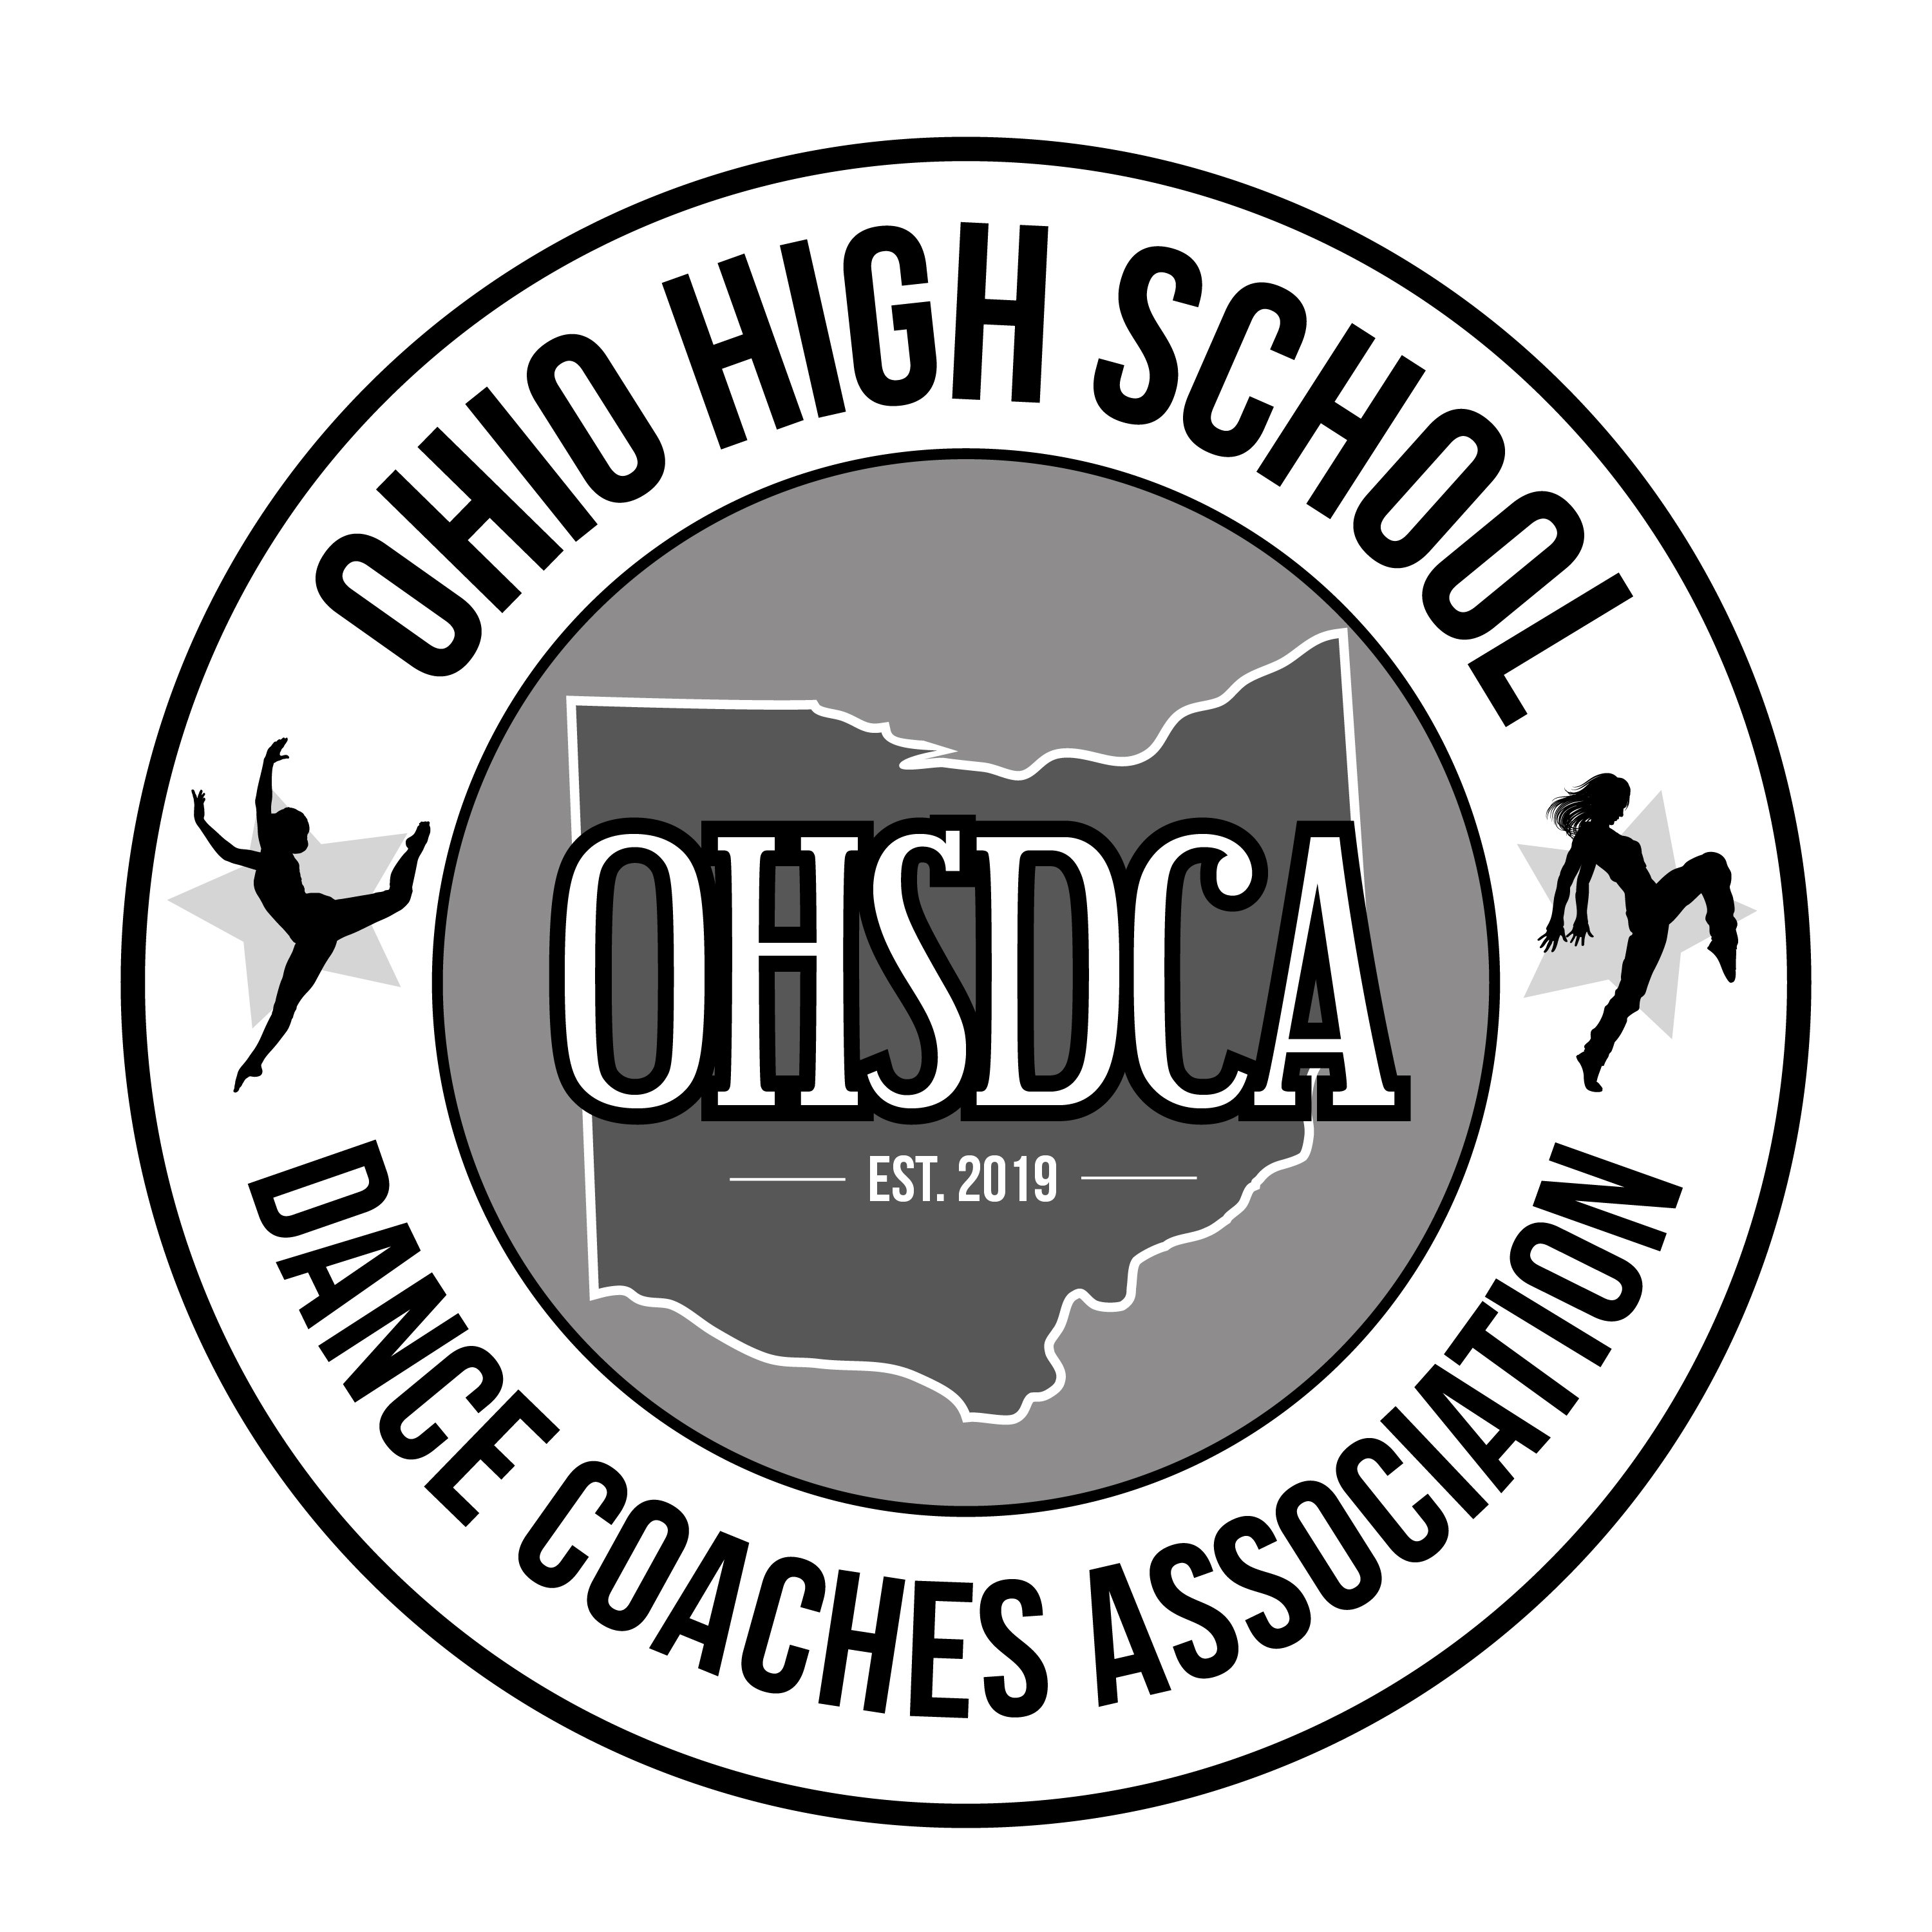 OHSDCA is a non-profit organization committed to the development and improvement of dance teams in the state of Ohio